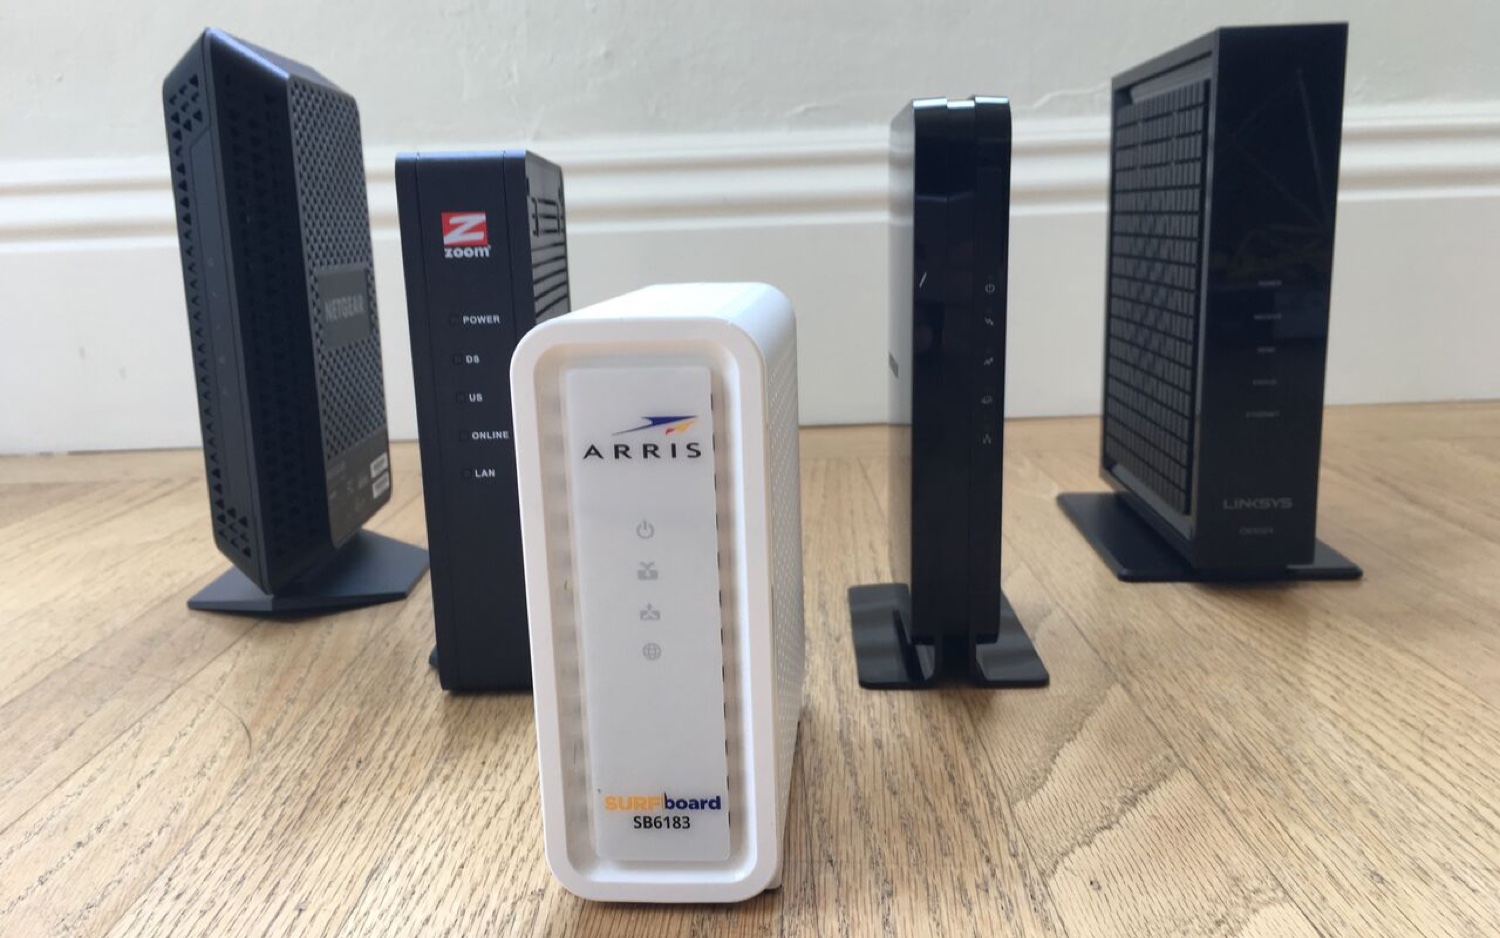 Modem vs. Router: Understanding the Differences